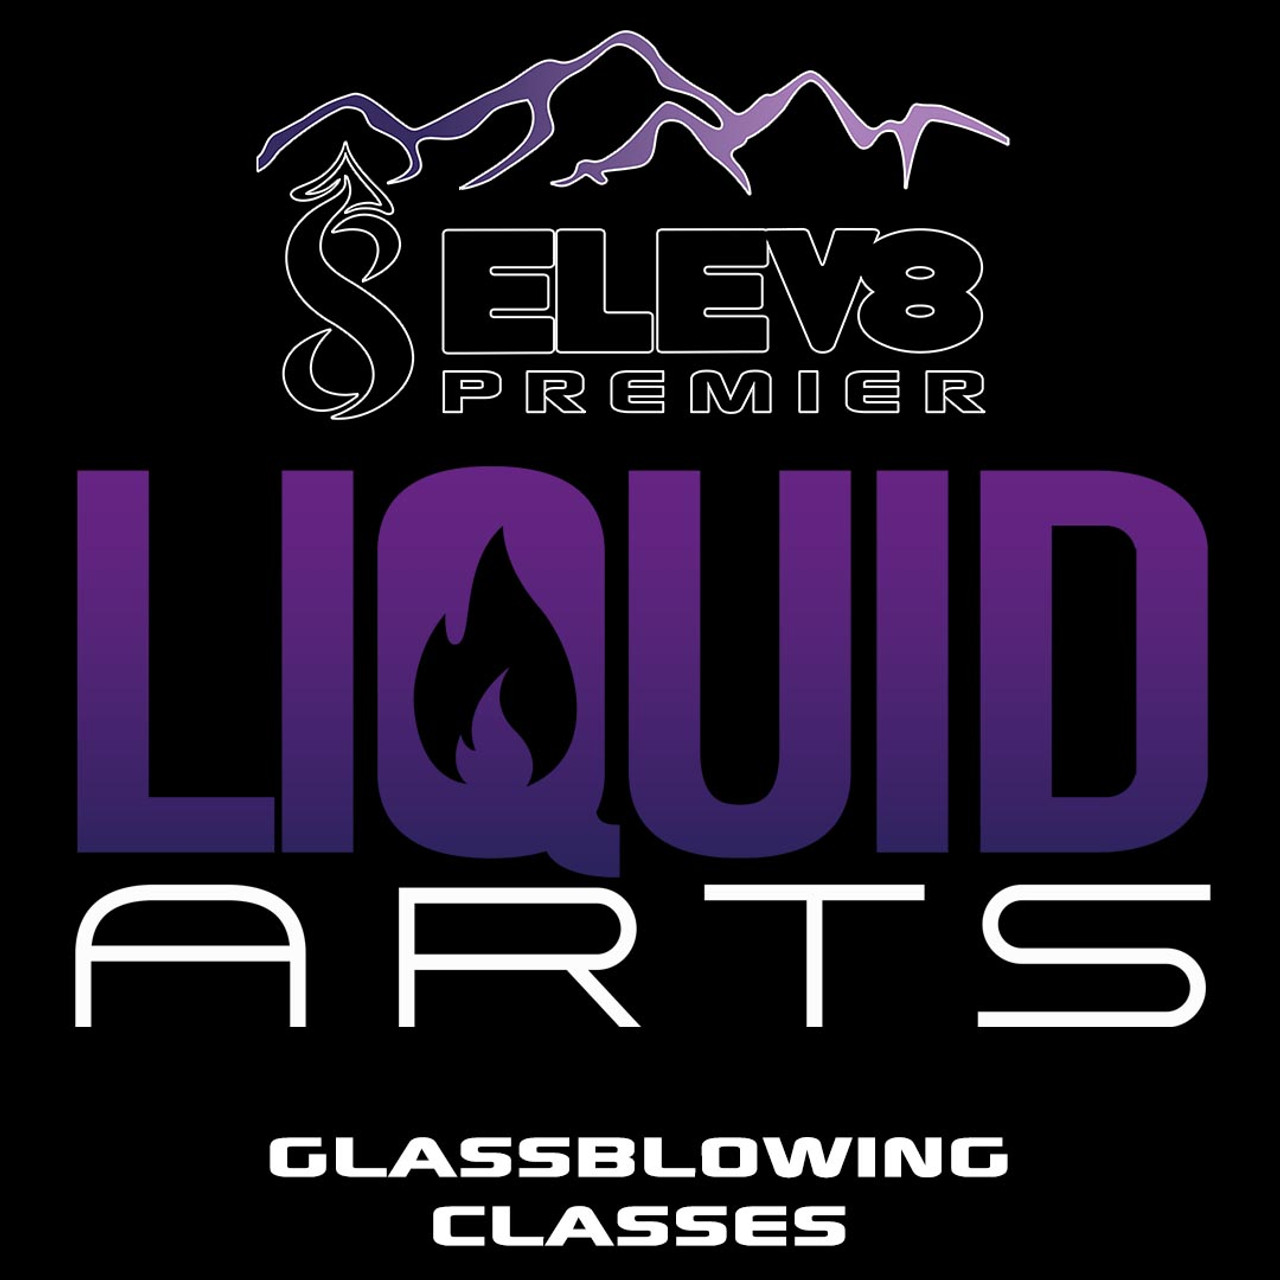 Glass Blowing Tools of the Trade - Glass Blowing classes - Ele8 Premier